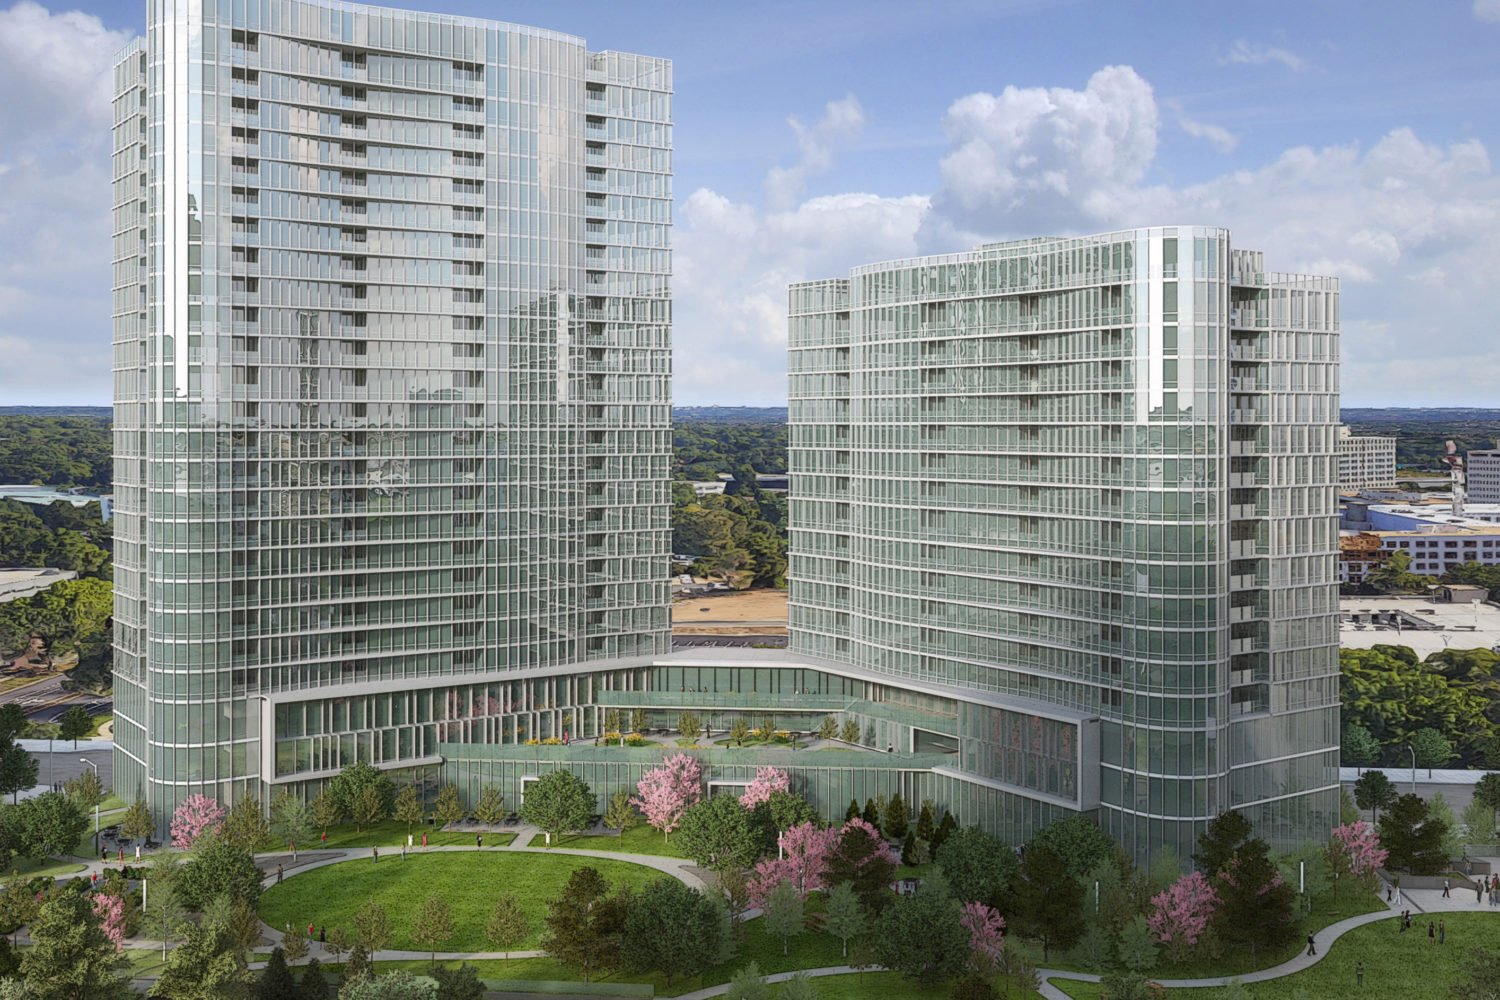 A Popular Retirement Choice Is Coming to Tysons